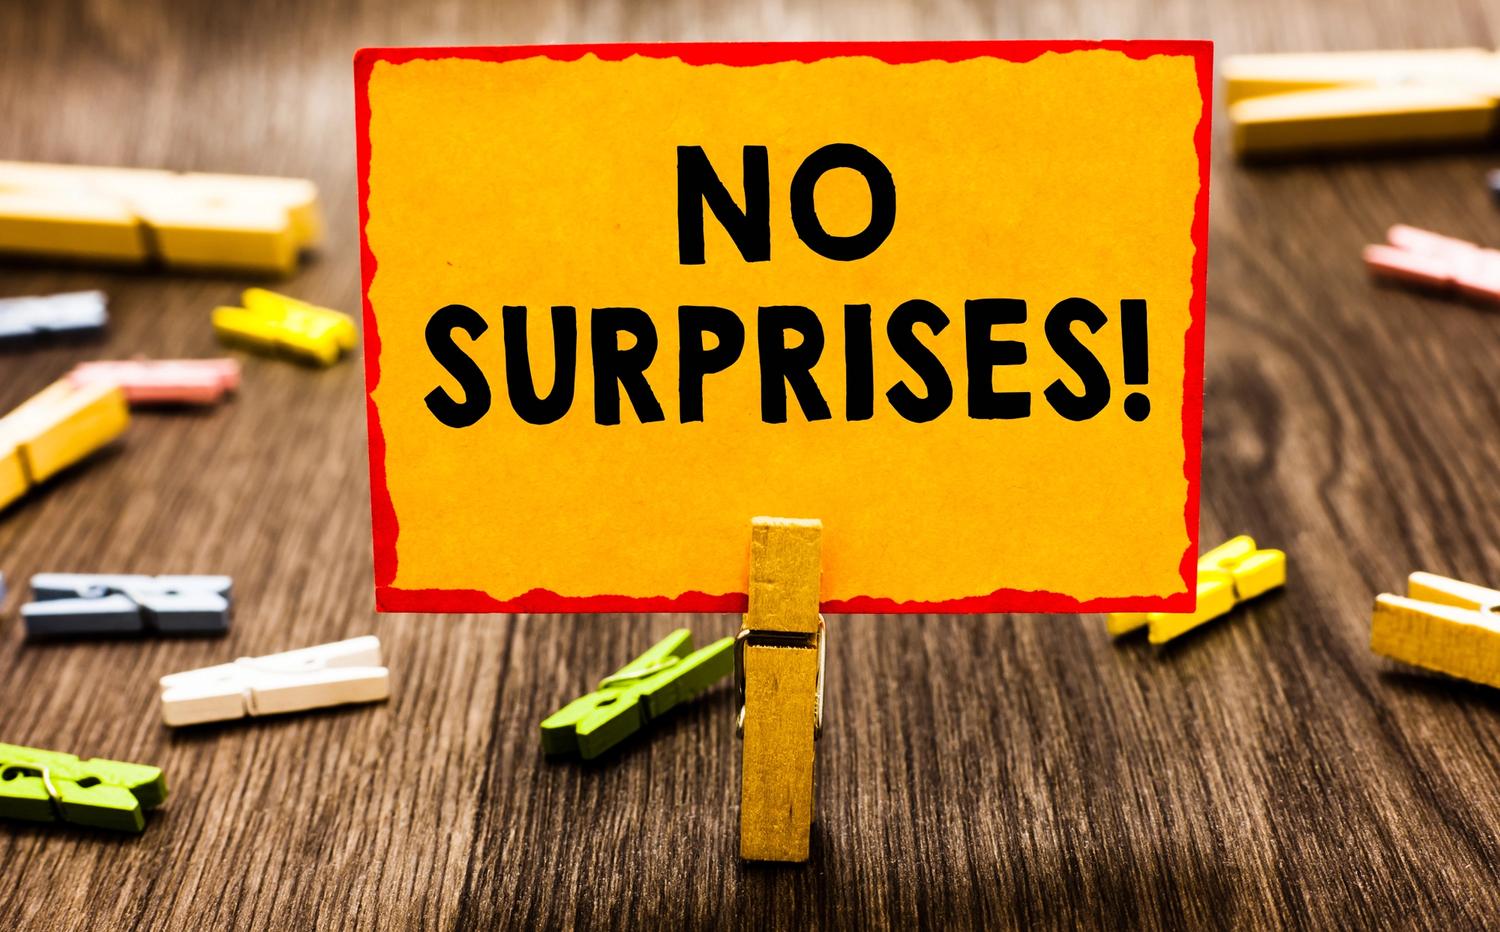 Use Technology to Avoid Surprises From the No Surprises Act